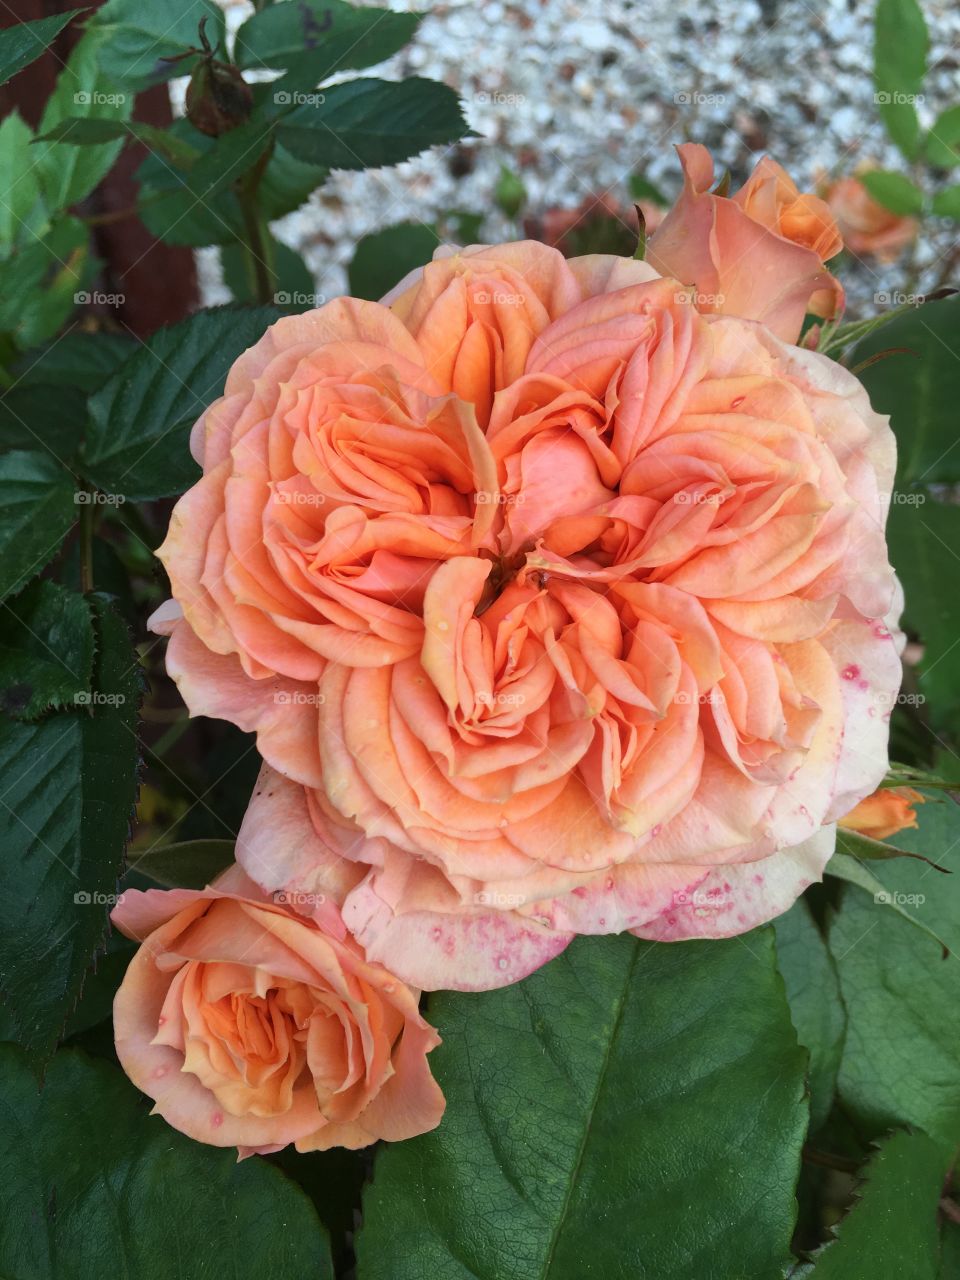 Pretty peach coloured rose flowers in close up in the garden in summer